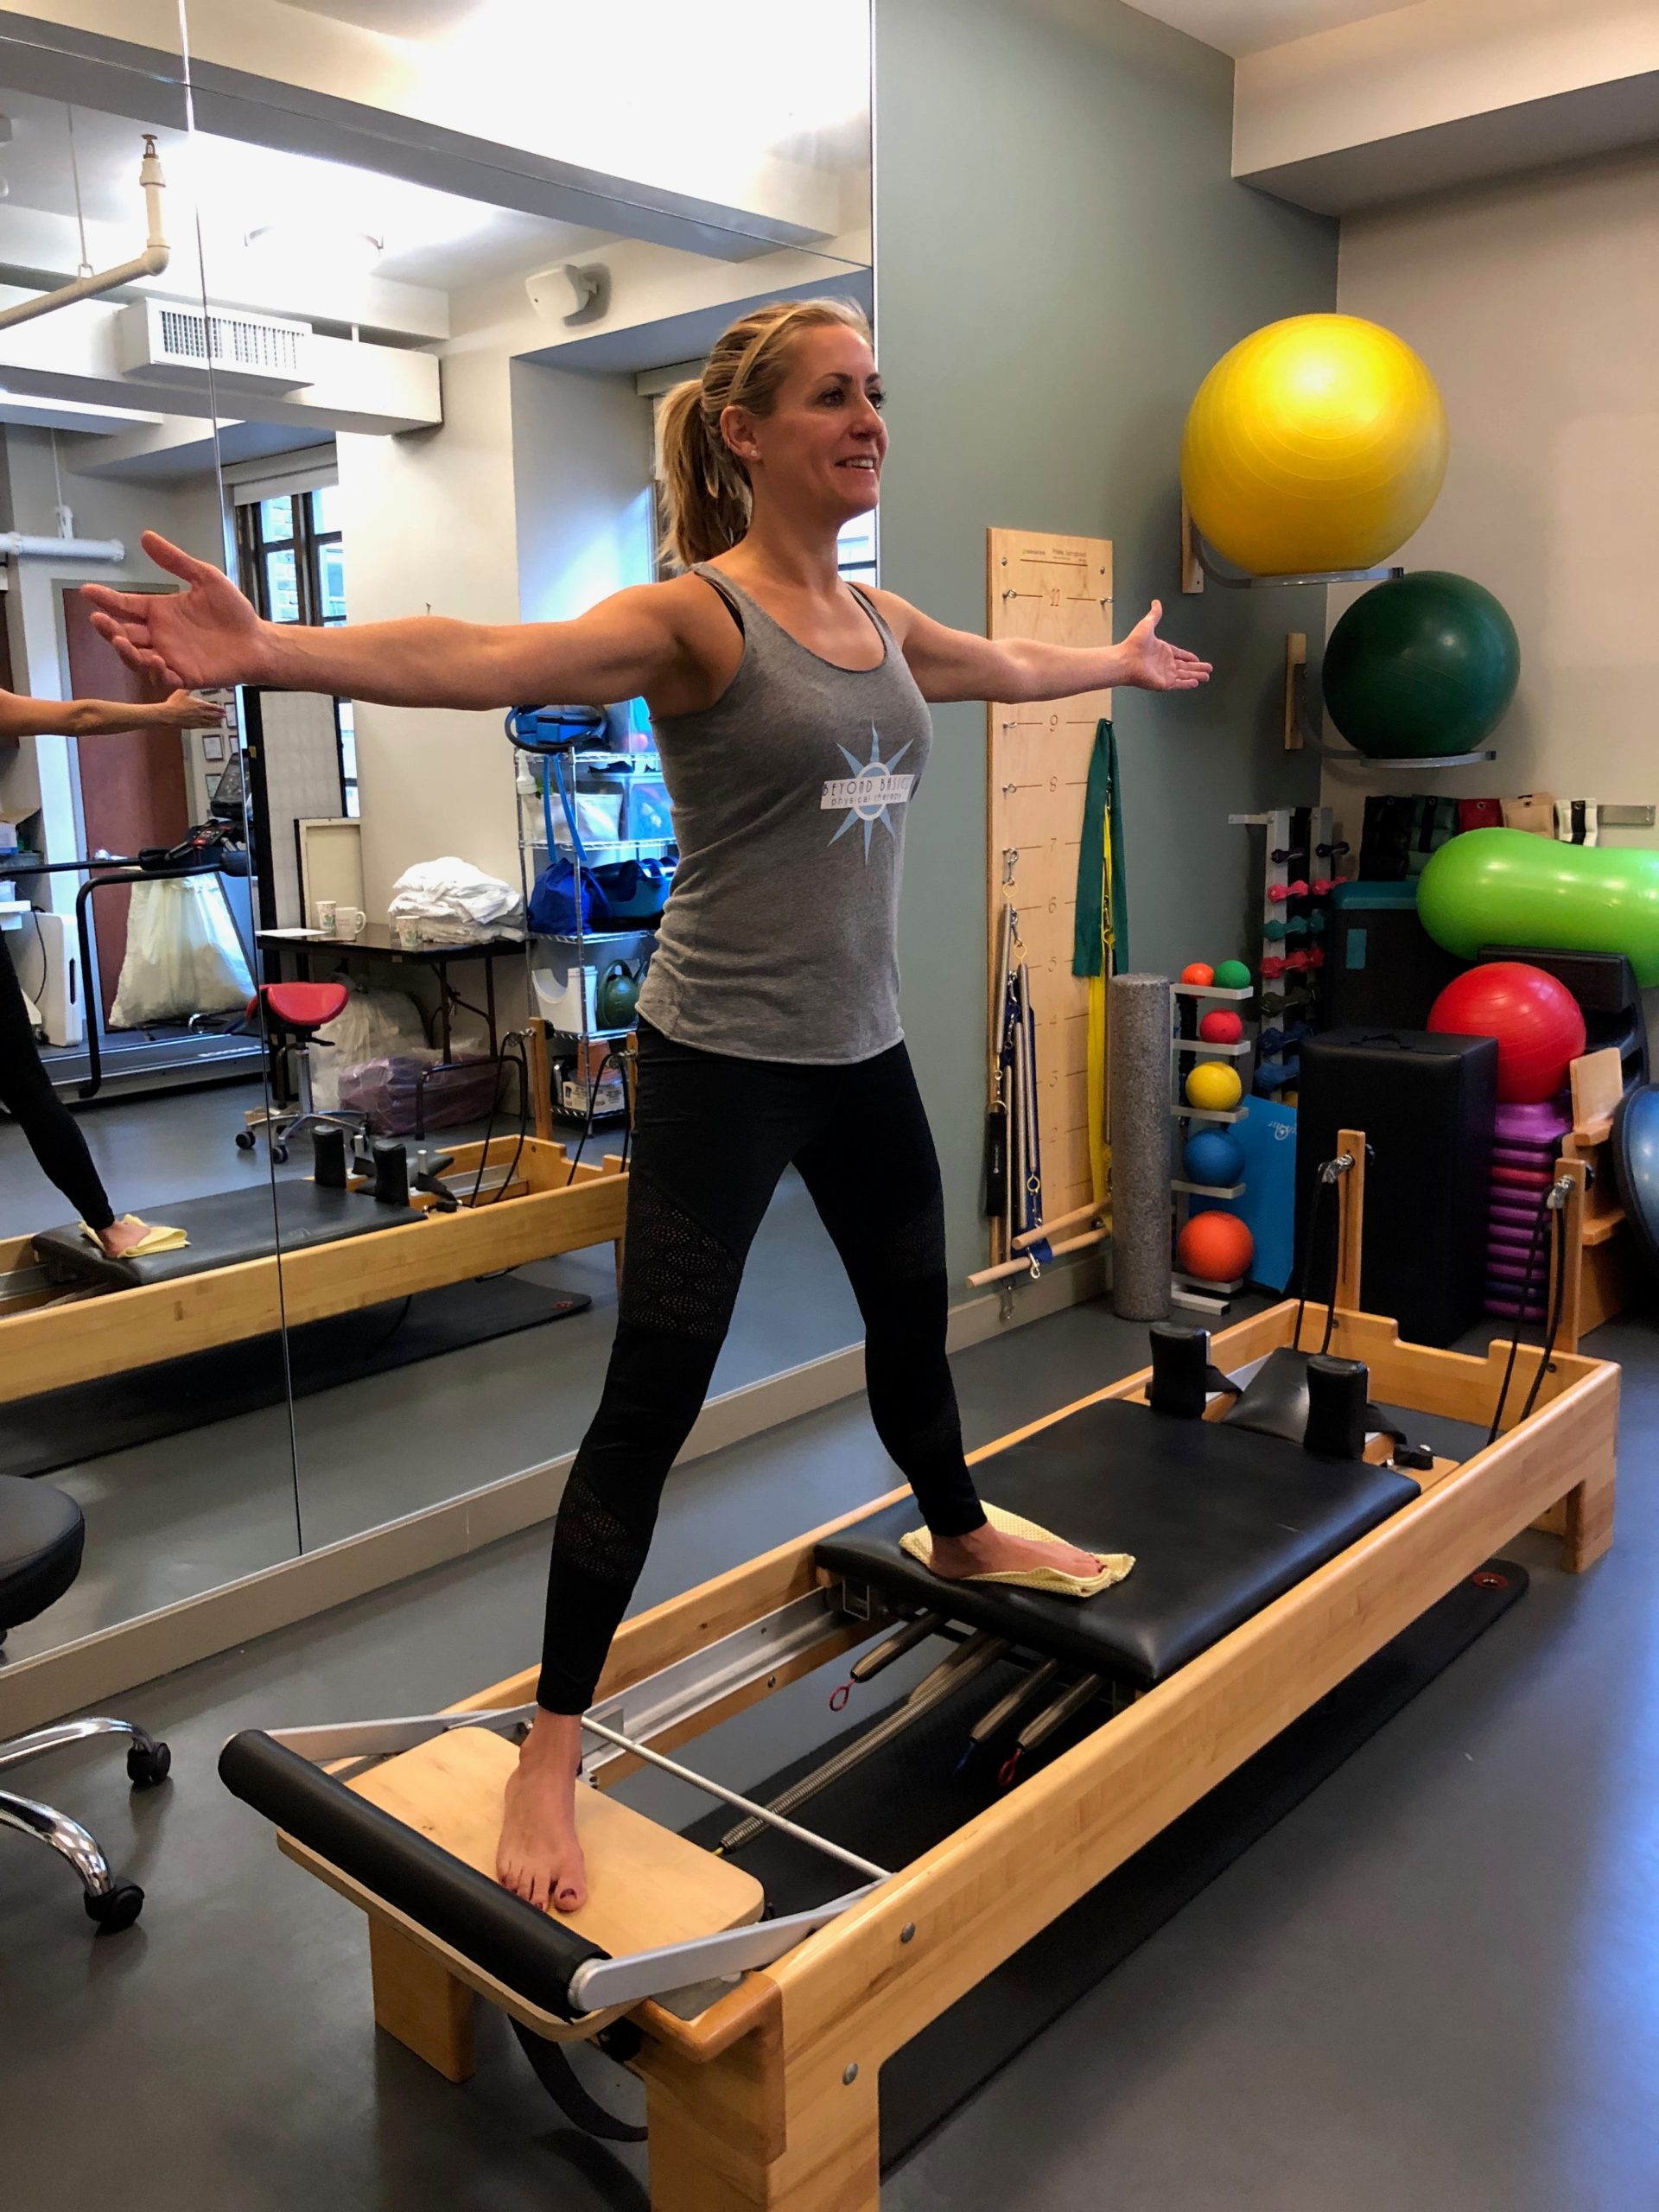 Pilates with Kierstin! Standing Side Splits – Beyond Basics Physical Therapy